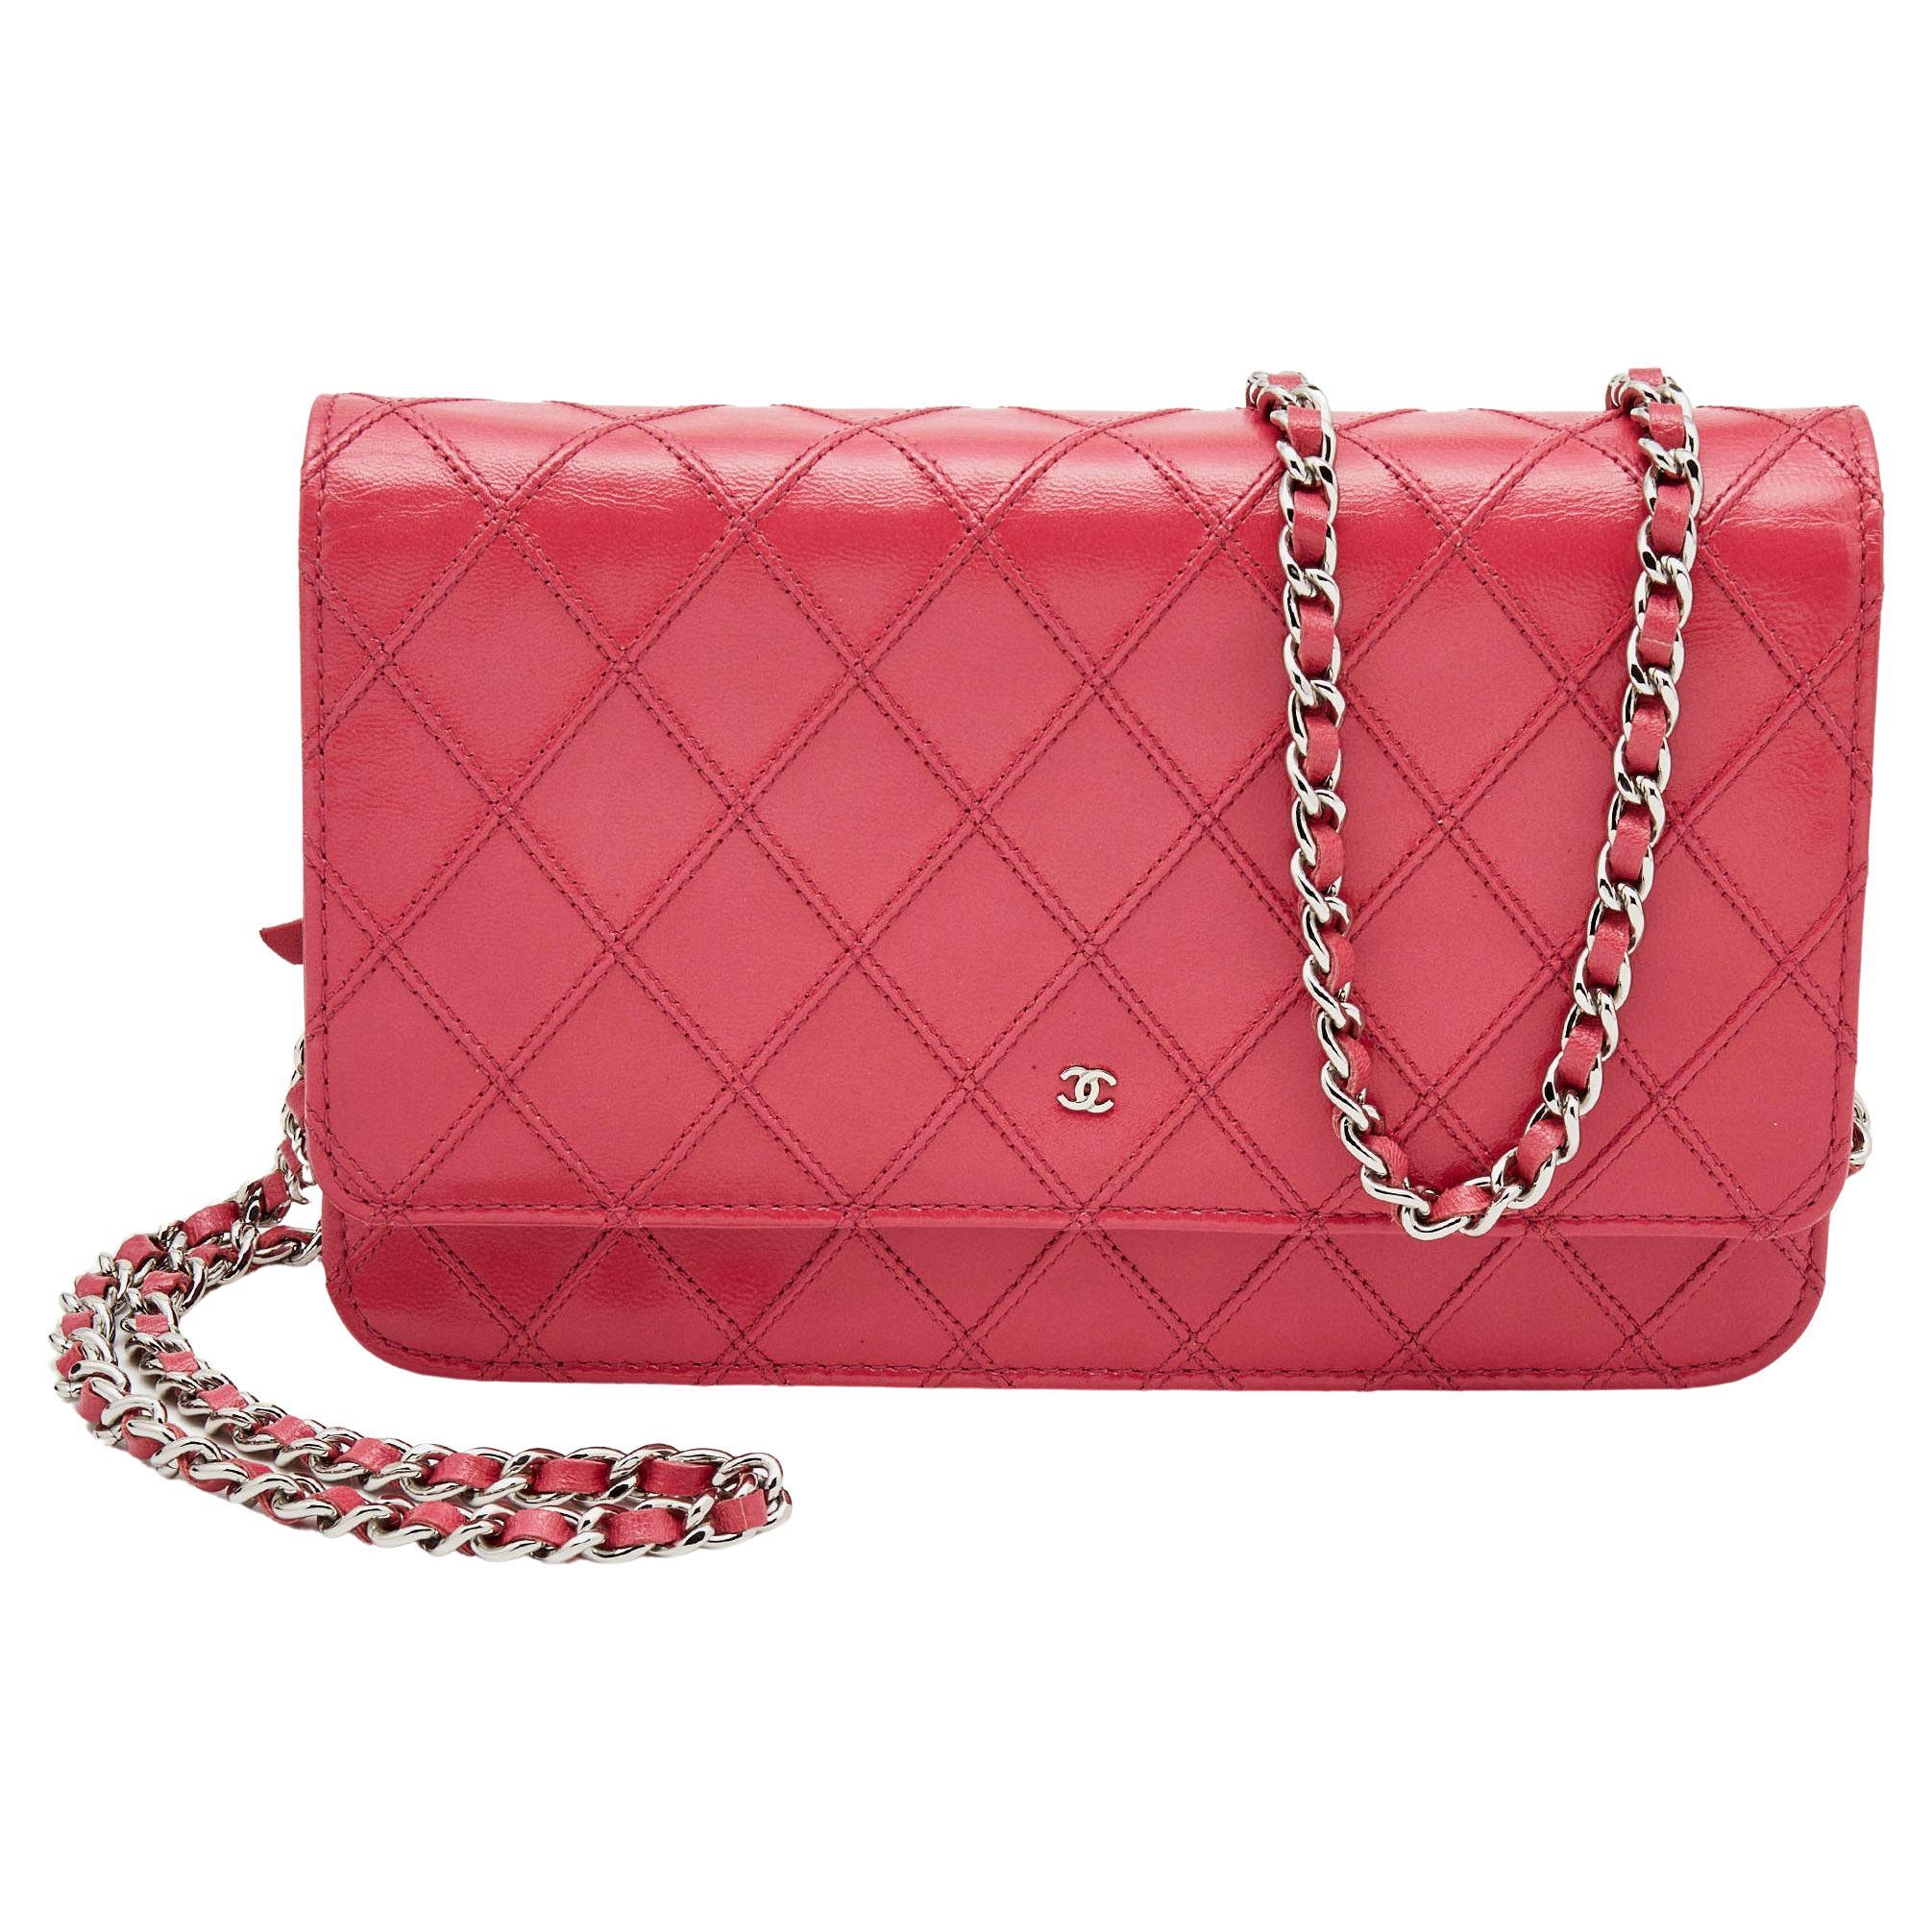 Chanel Pink Quilted Leather WOC Bag For Sale